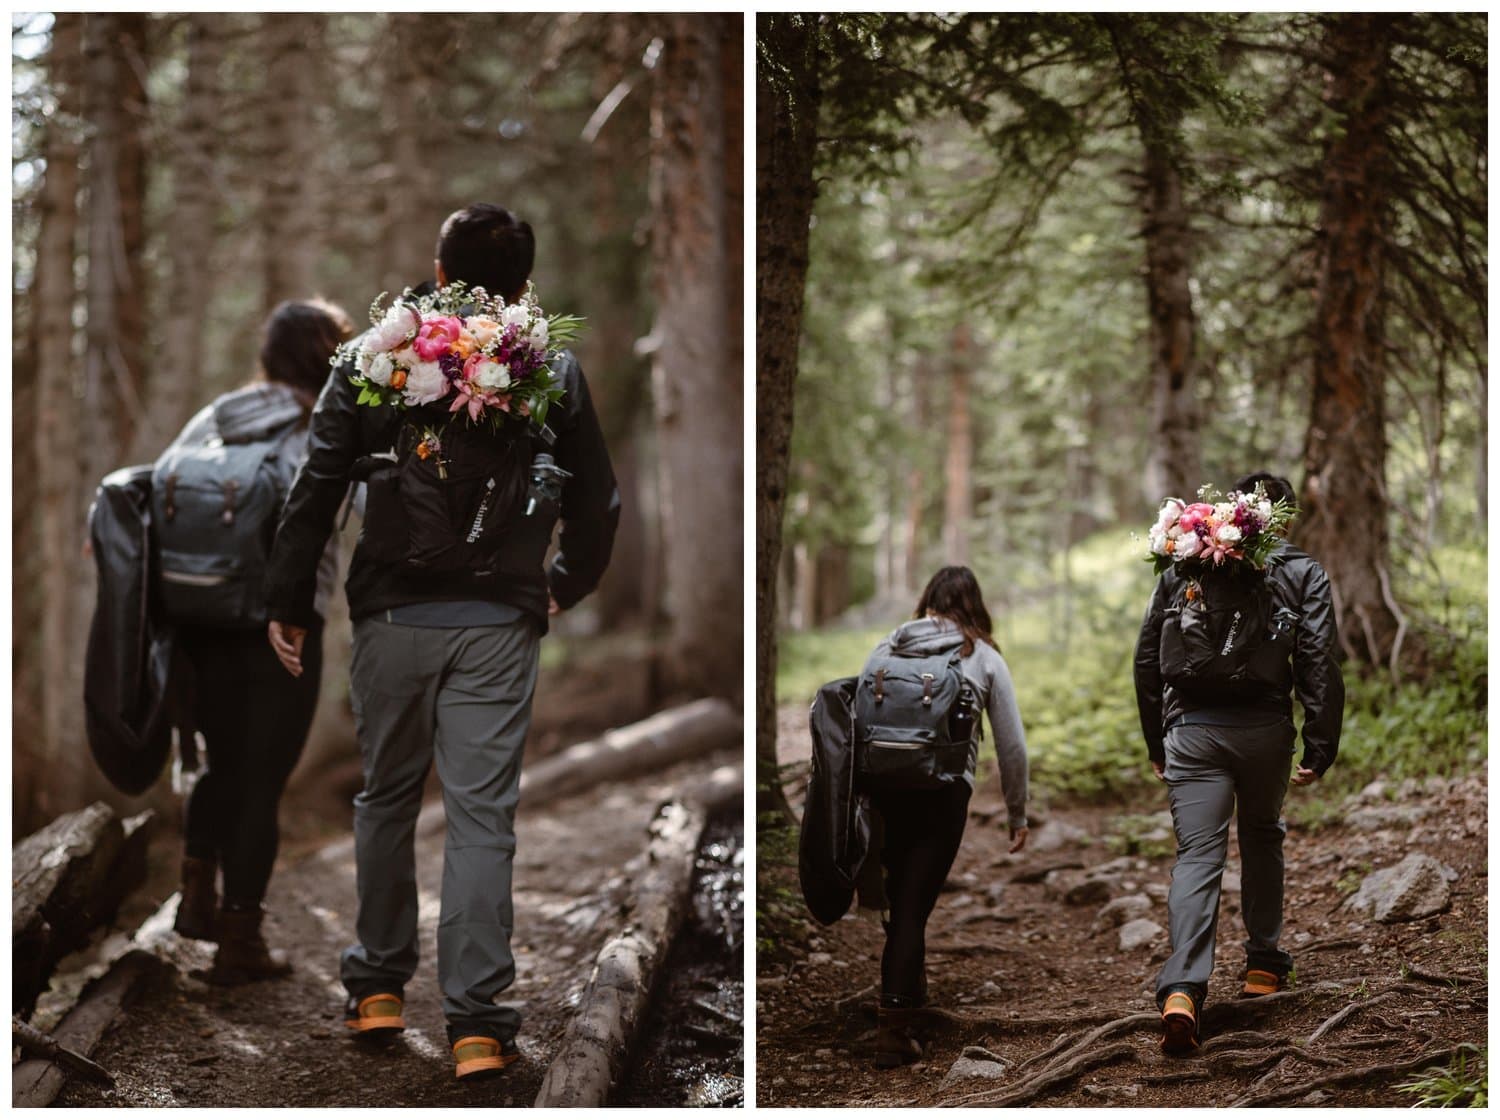 Bride and groom hiking on a trail near Boulder, Colorado. The groom is carrying the bride's bouquet in his backpack.